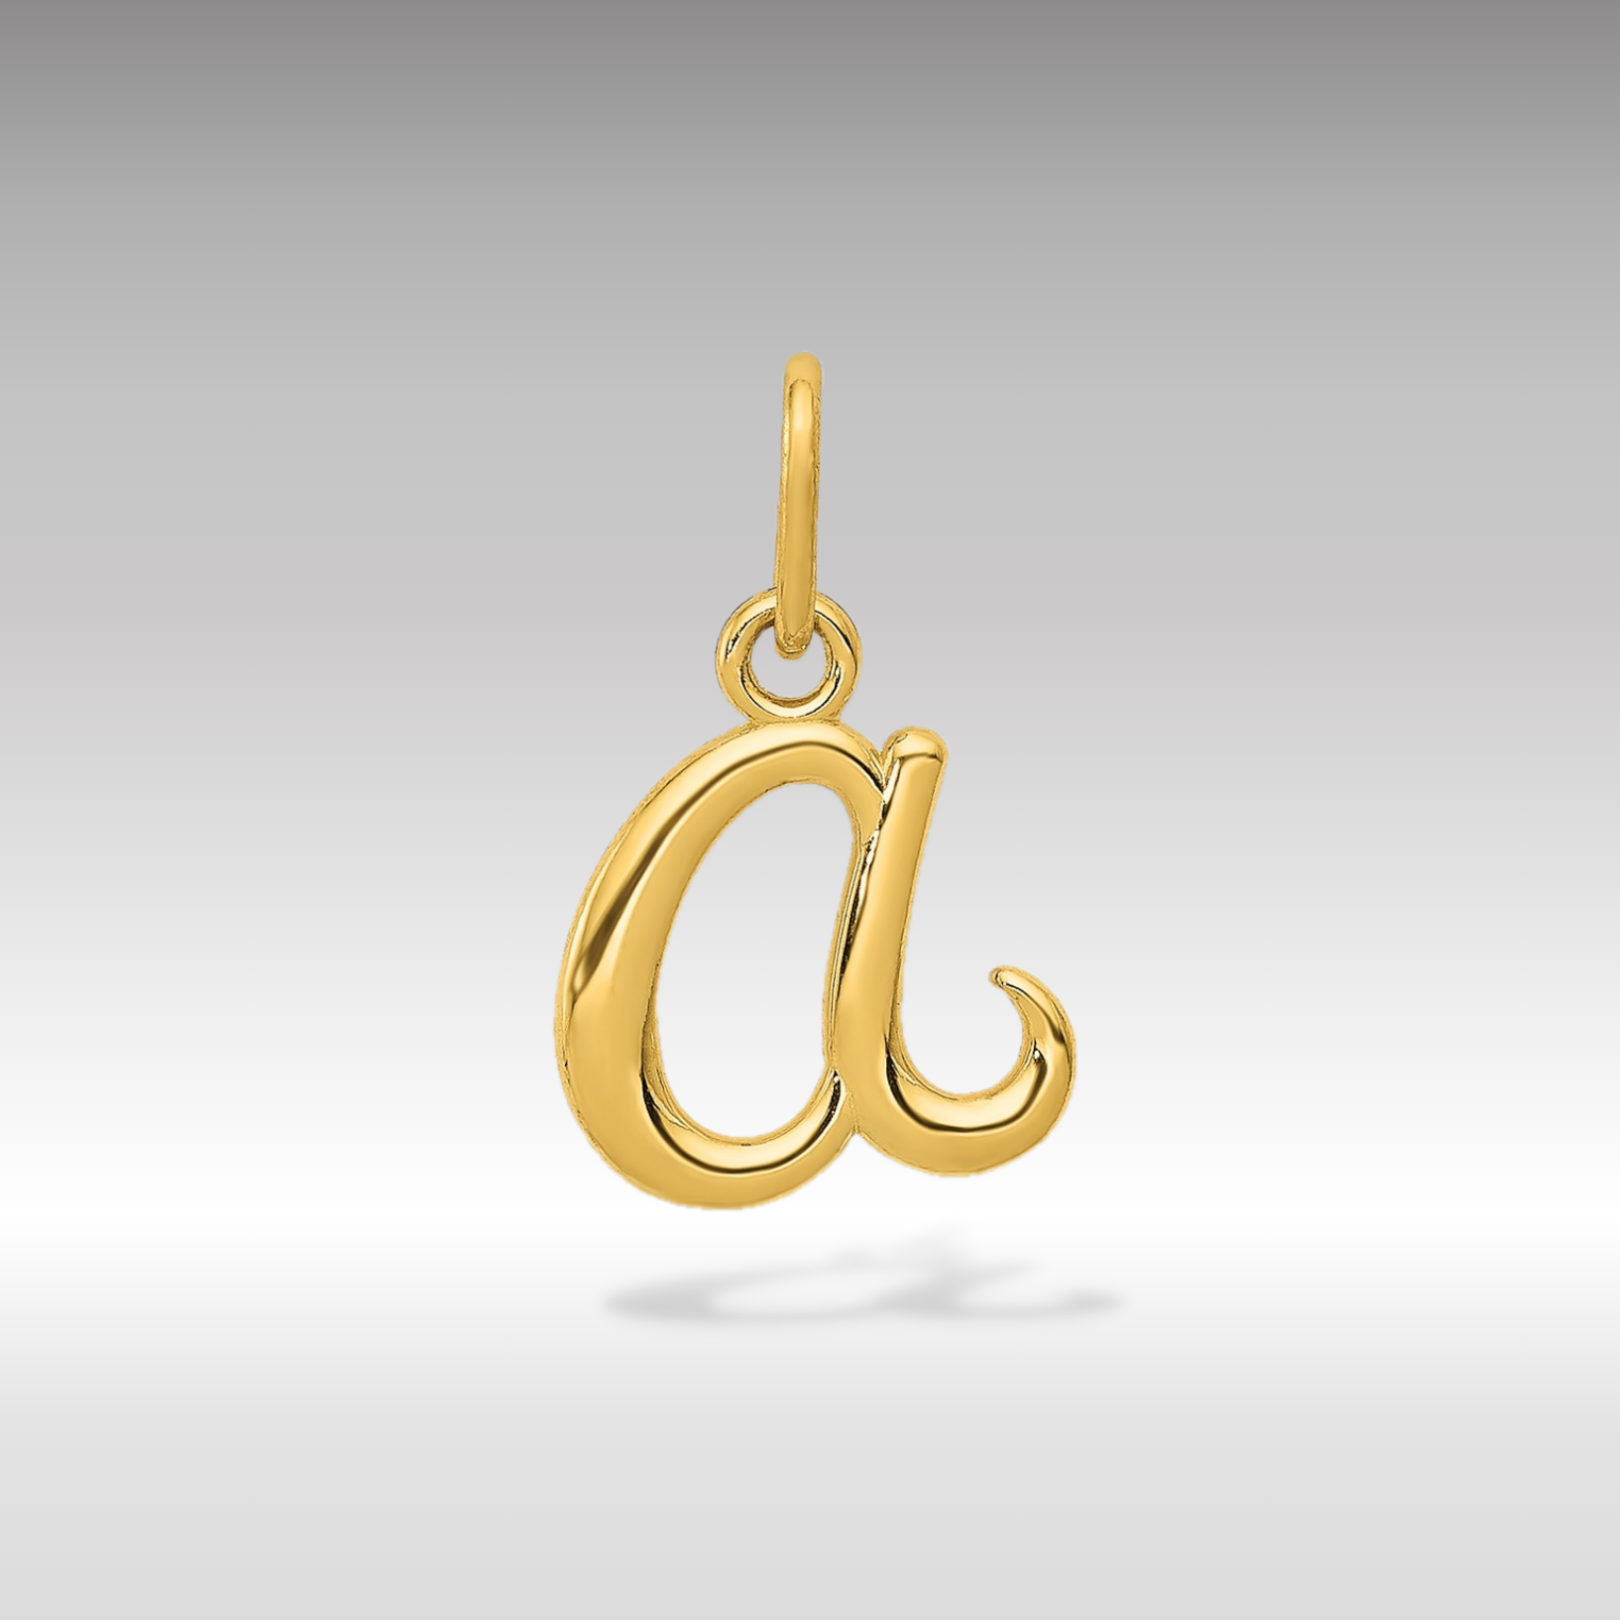 14K Gold Lowercase Initial "a" Pendant - Charlie & Co. Jewelry